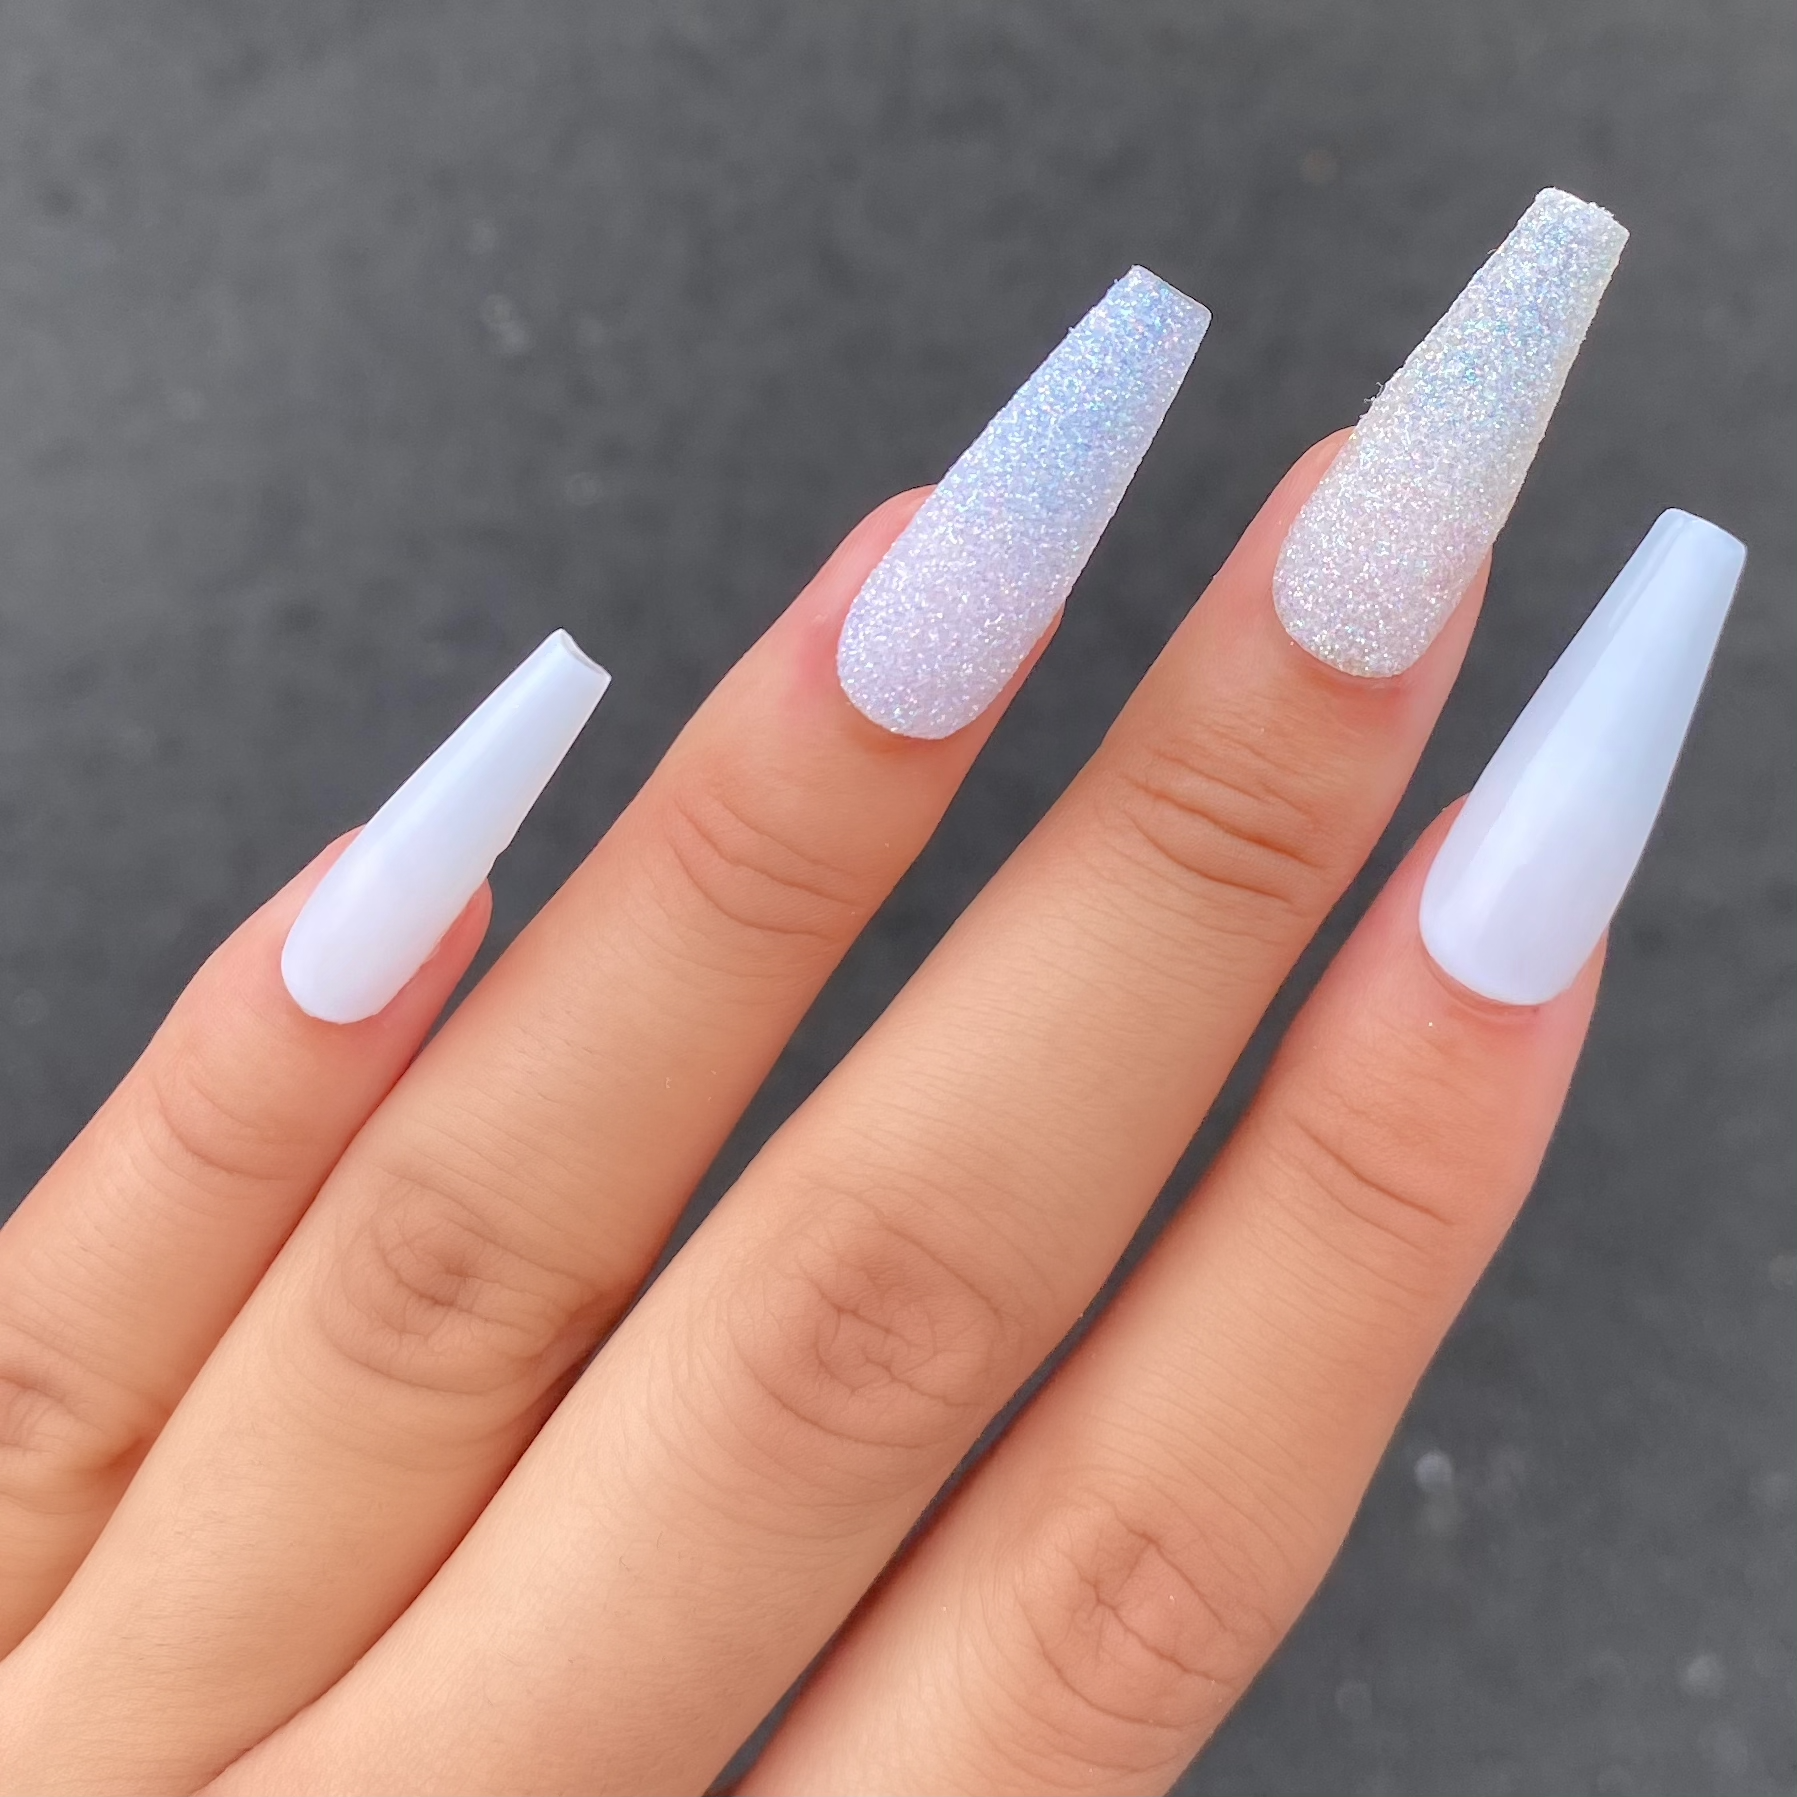 12 White Nails Designs - Love and Marriage beauty